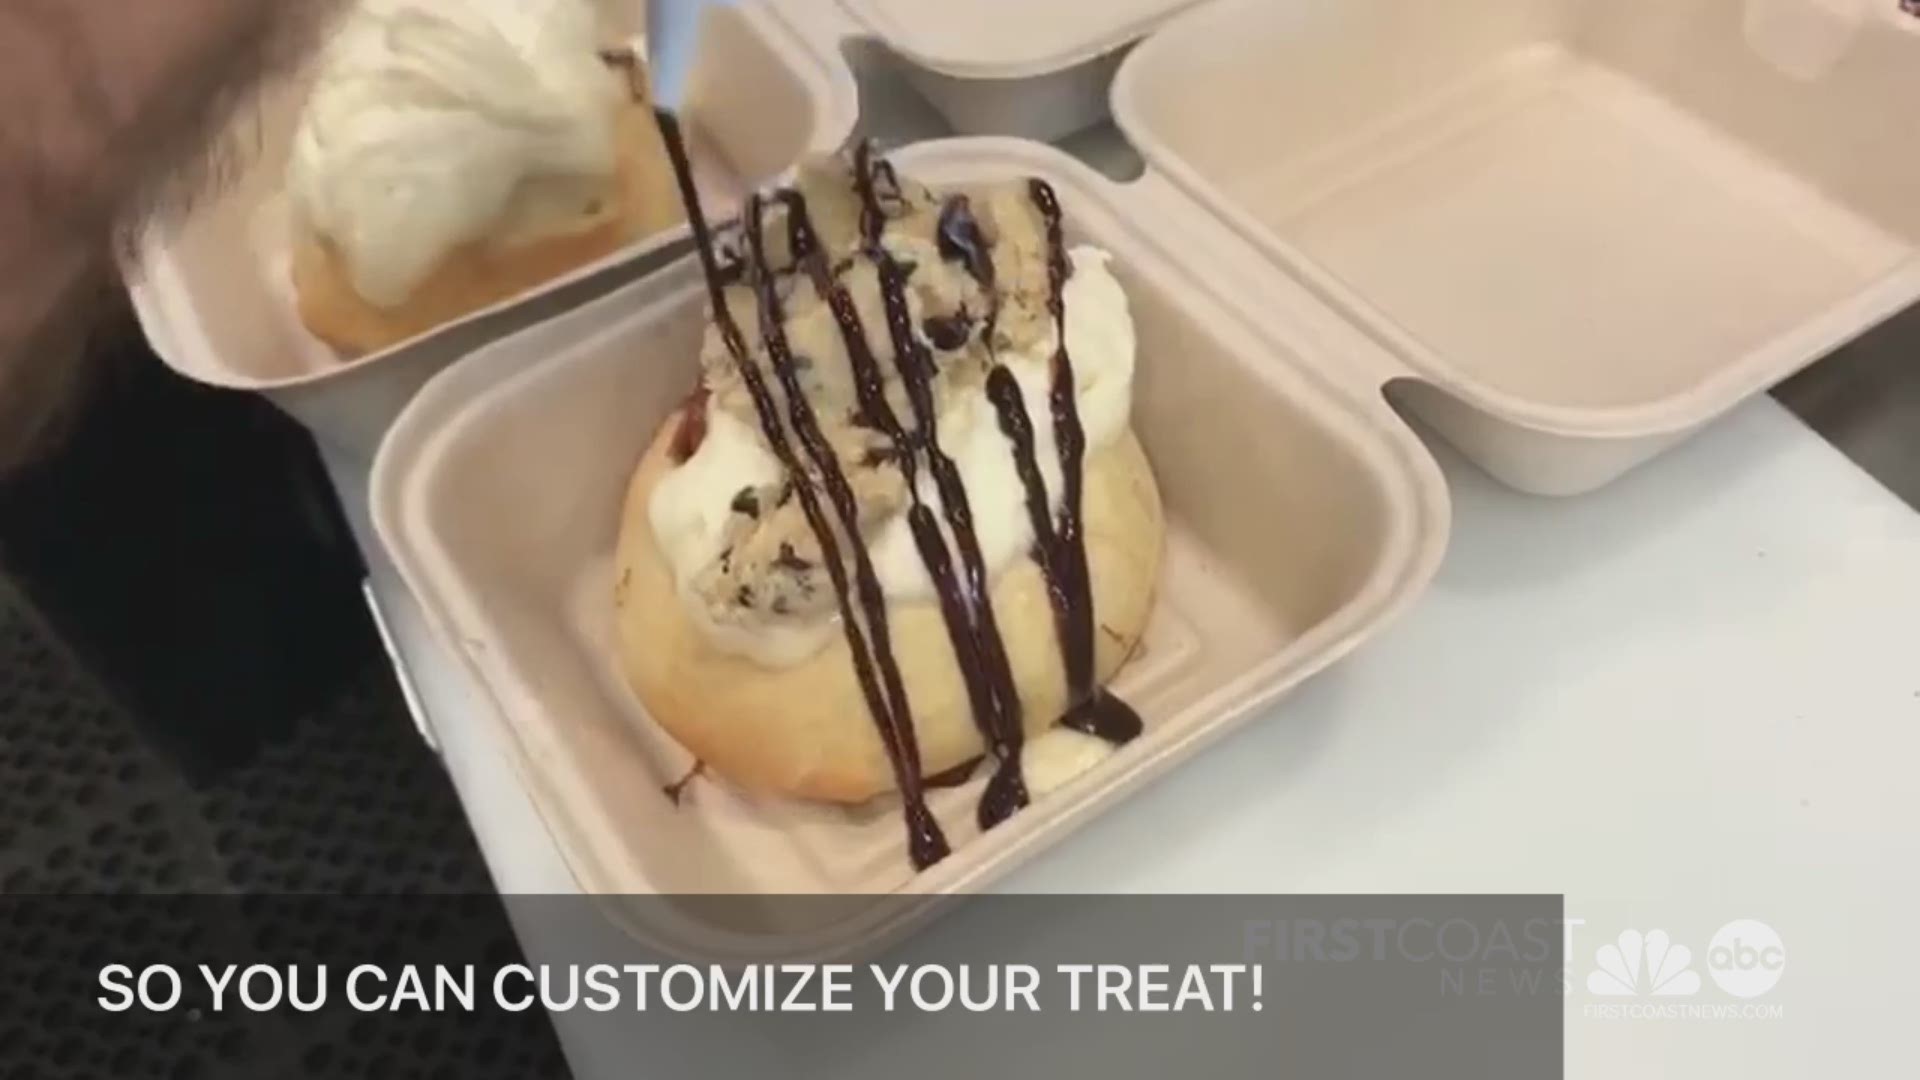 The bakery allows you to customize your cinnamon rolls with 17 frosting flavors and 20 toppings.